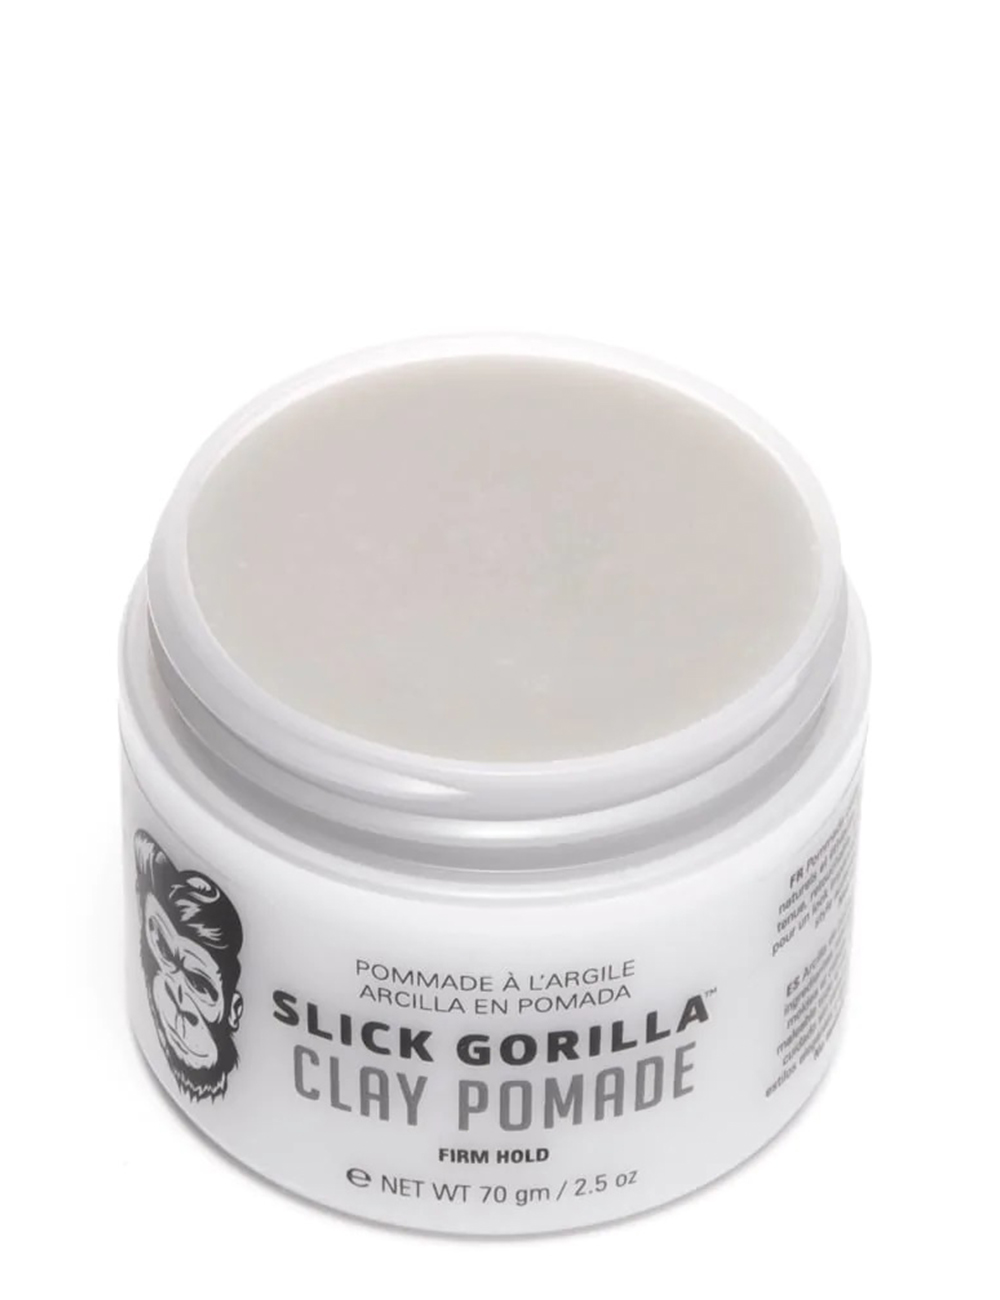 Slick Gorilla Clay Pomade Firm Hold Hair Styling Product 70g 2.5oz Top Down Lid Off